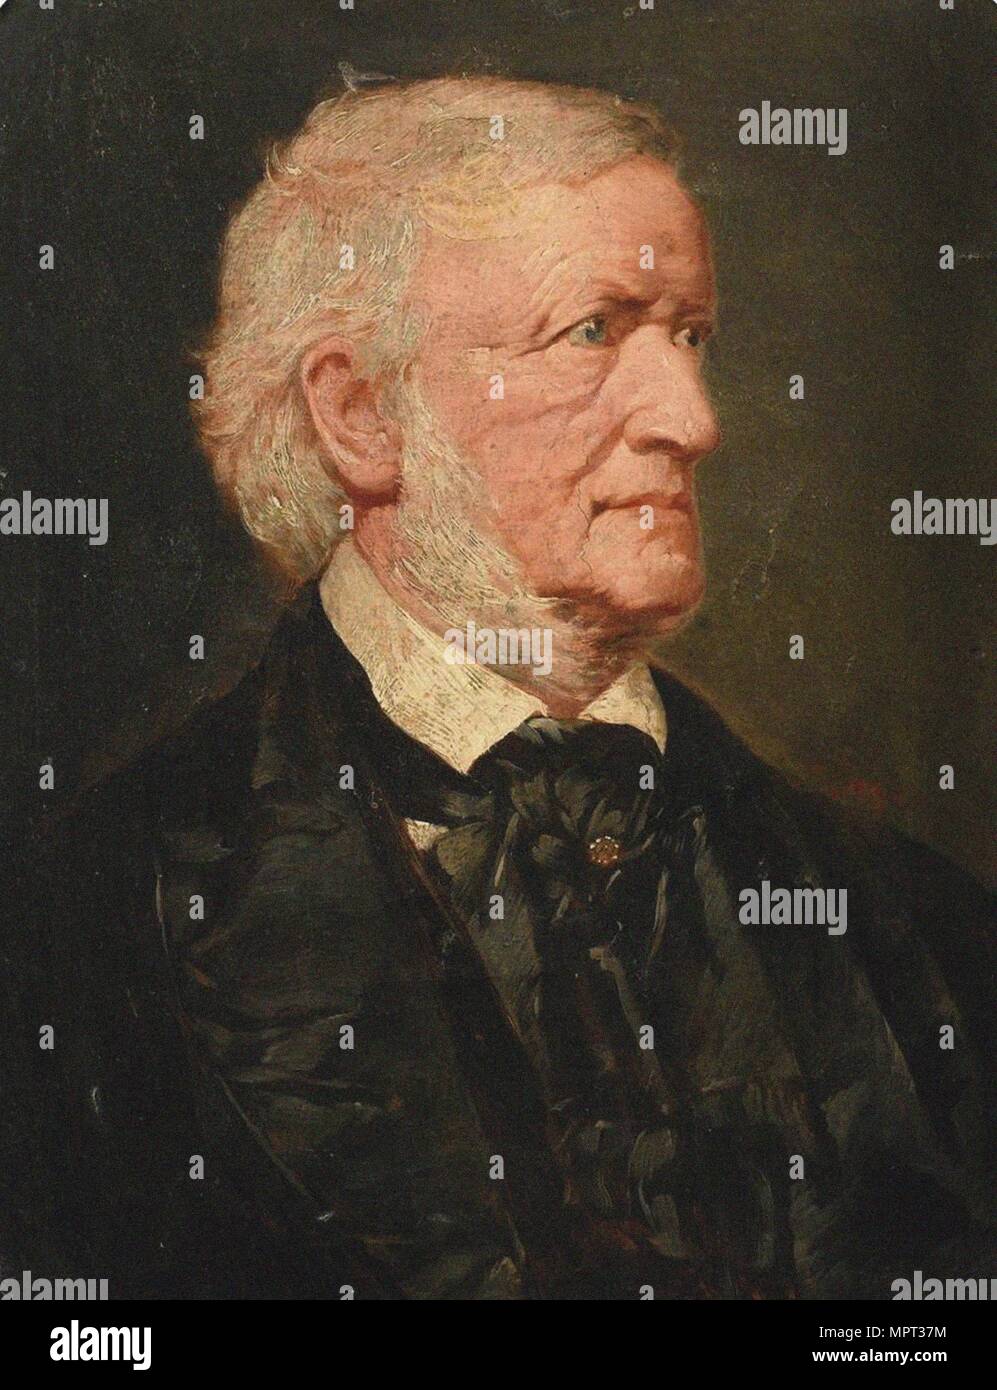 Portrait of the Composer Richard Wagner (1813-1883). Stock Photo